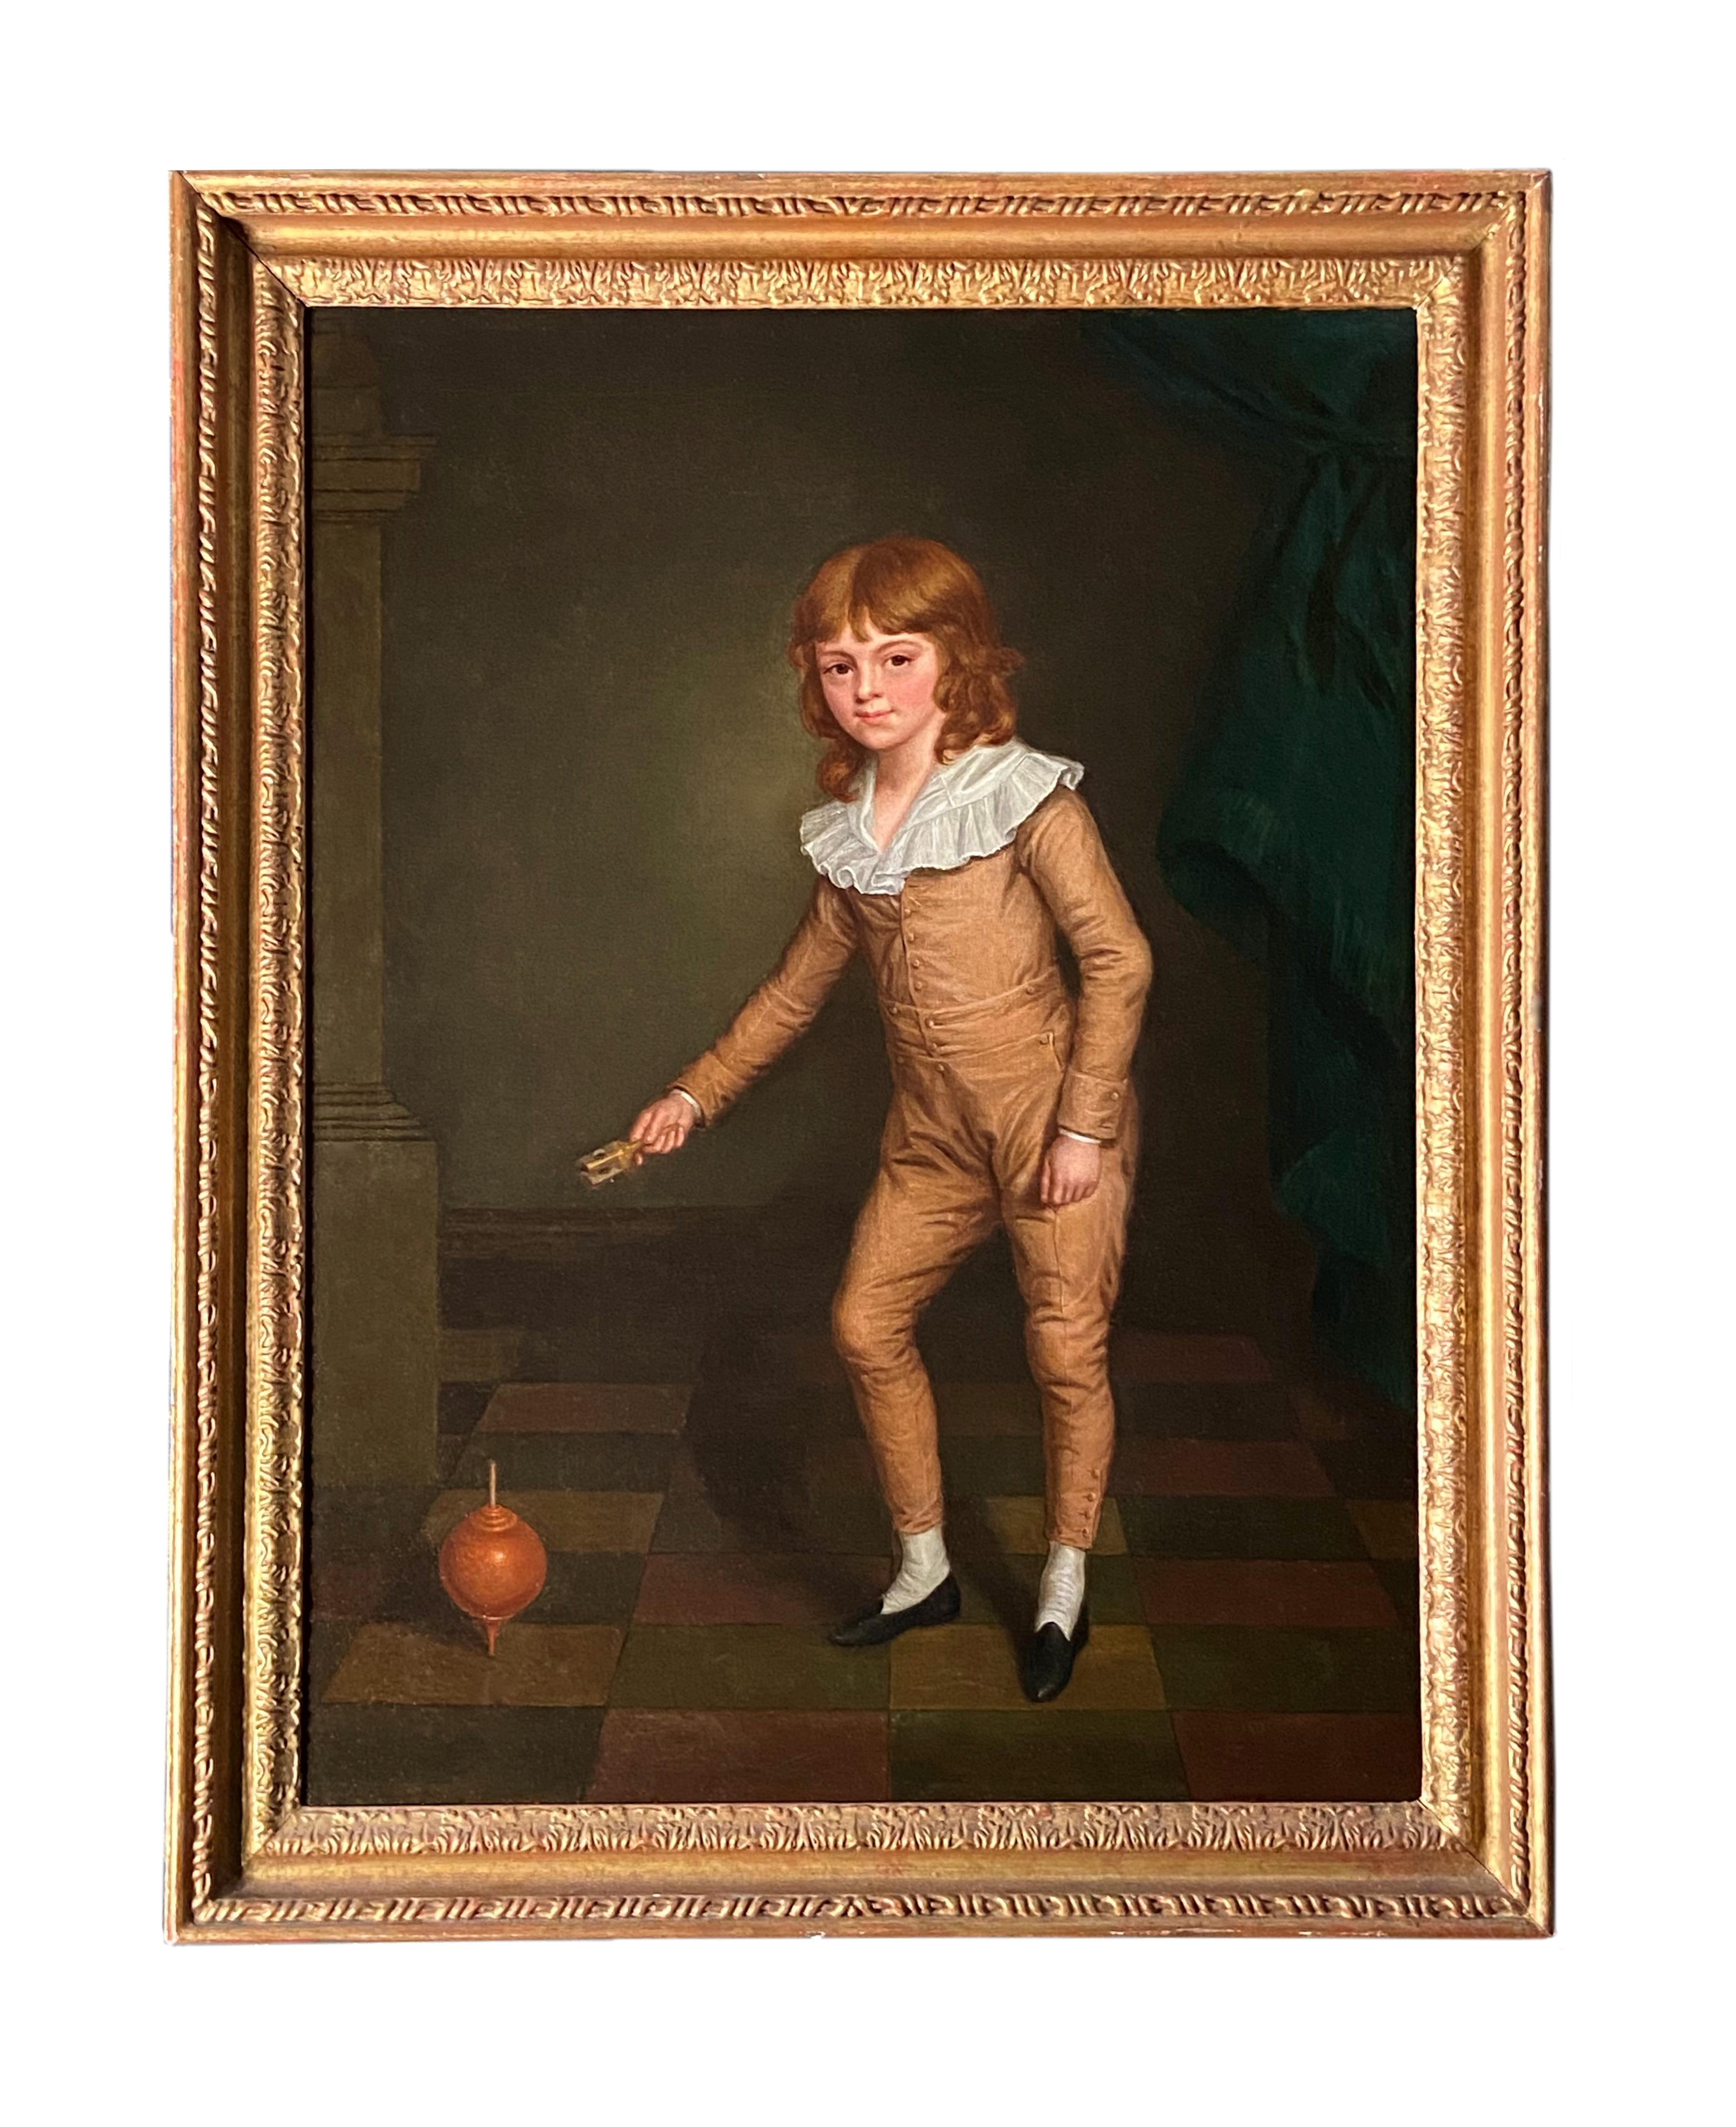 19th Century English Portrait of a Young Boy in a Orange Silk Suit - Painting by Sir John Hoppner